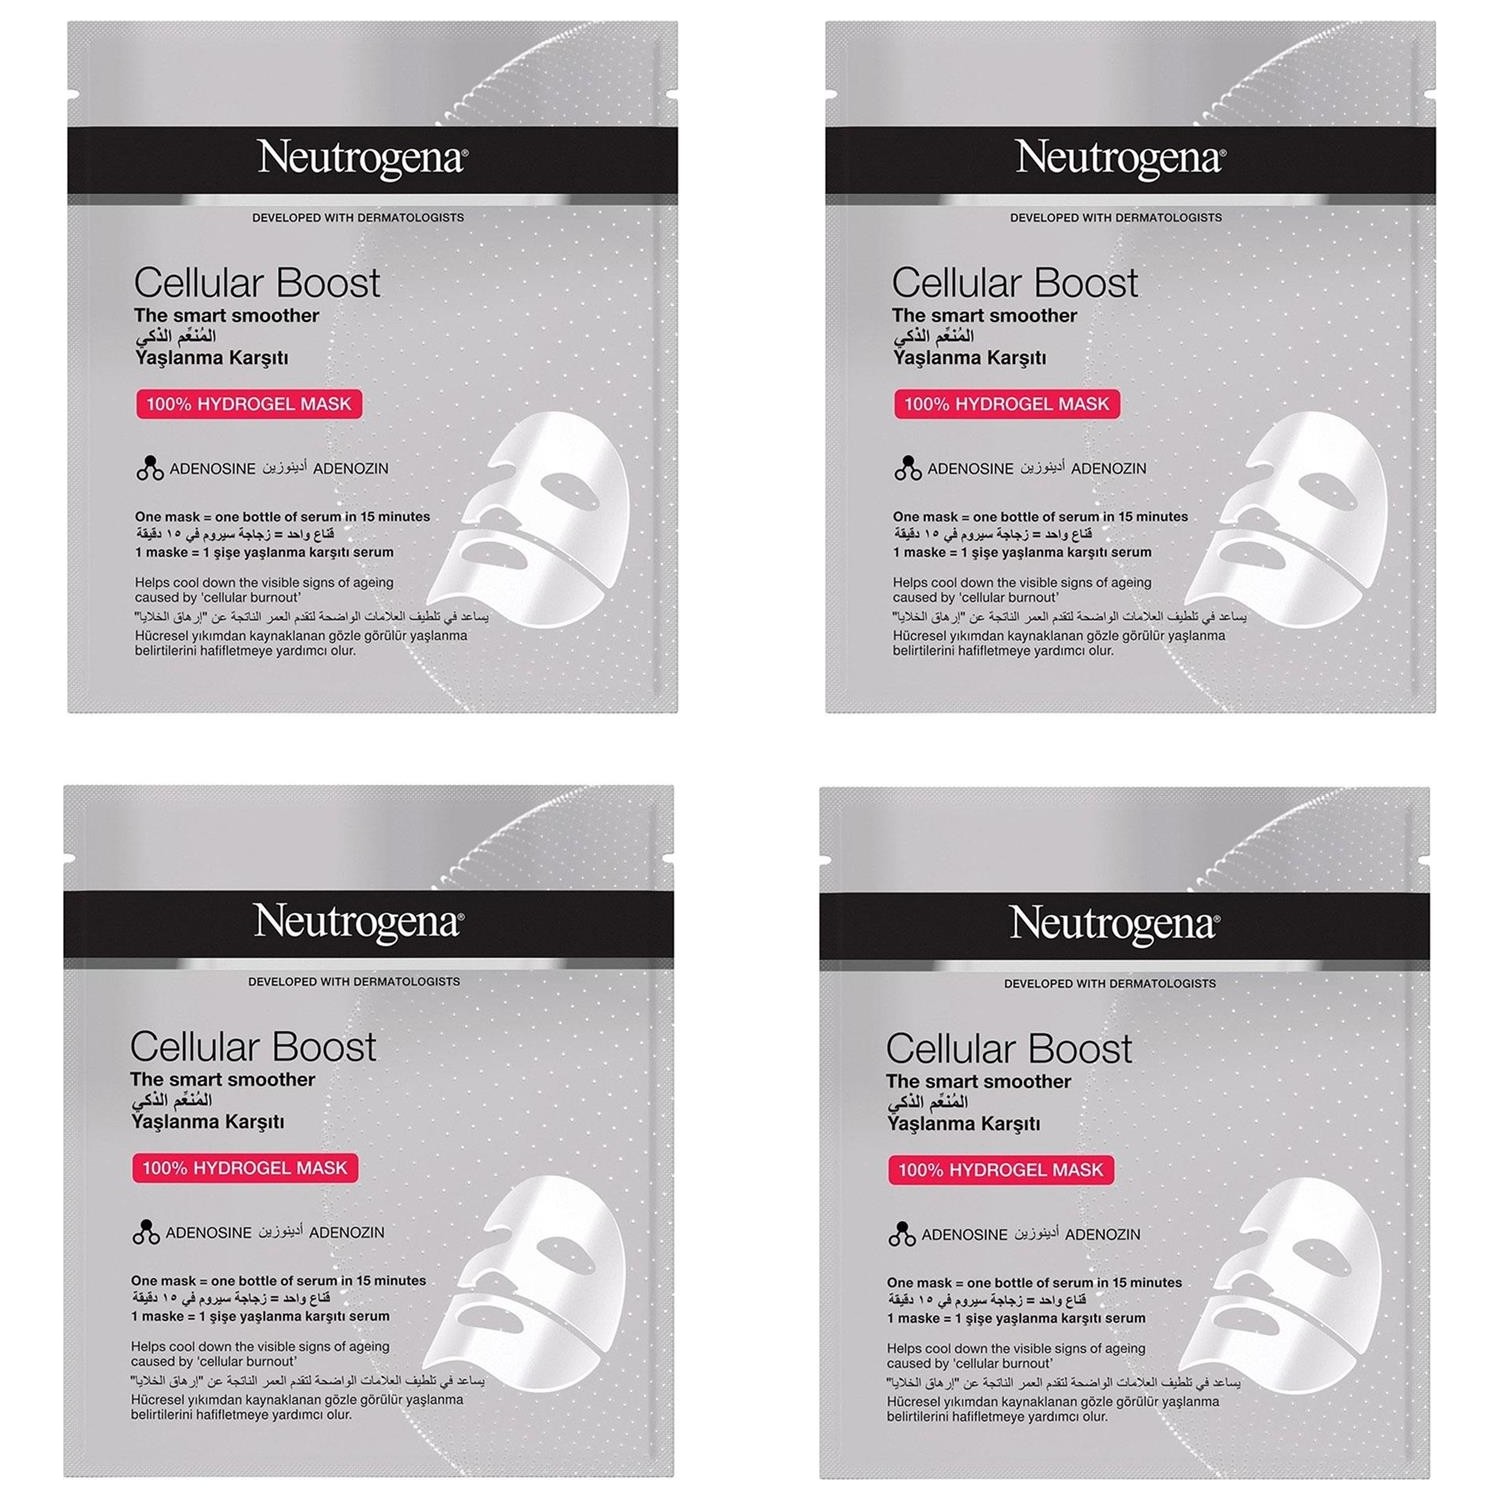 Маска Neutrogena Cellular Boost омолаживающая гидрогелевая, 4 упаковки по 30 мл 3pcmasks 6filter face mask washable mask mouth anti pm2 5 dust mouth mask activated carbon filter mask fabric mask mascarillas